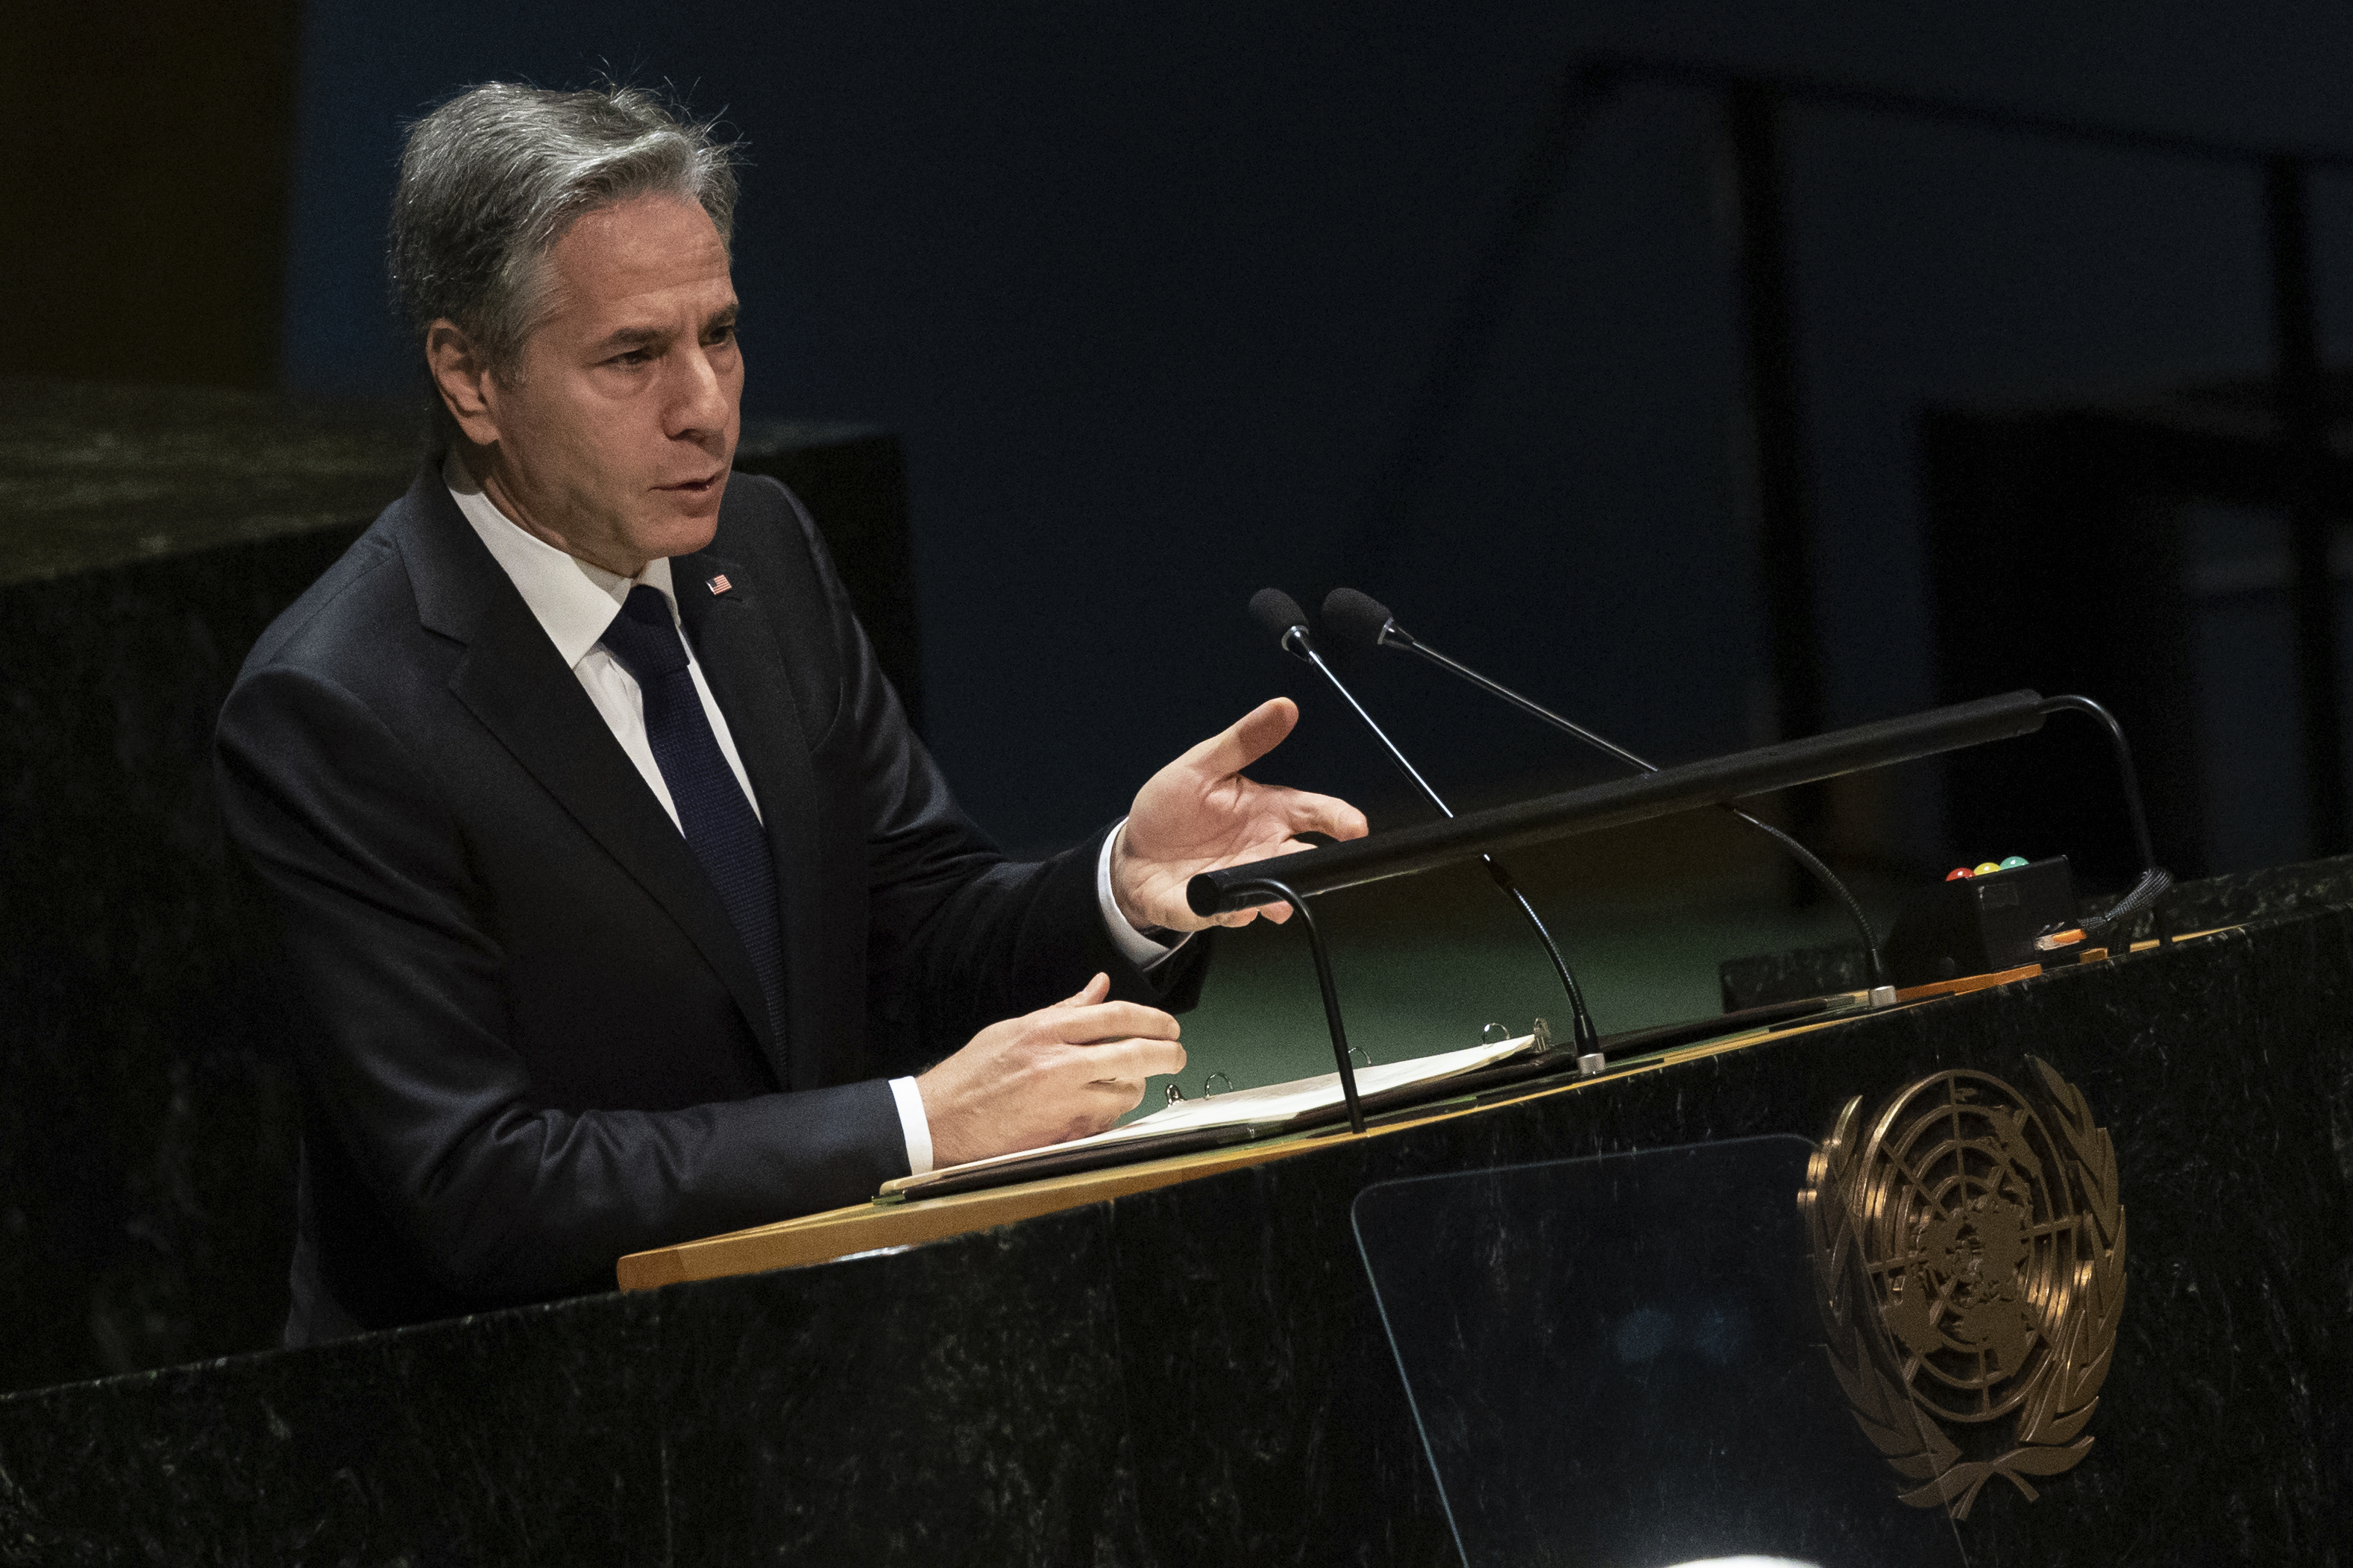 U.S. Secretary of State Antony J. Blinken addresses the 2022 Nuclear Non-Proliferation Treaty (NPT) review conference, in the United Nations General Assembly, Monday, Aug. 1, 2022. (AP Photo/Yuki Iwamura)